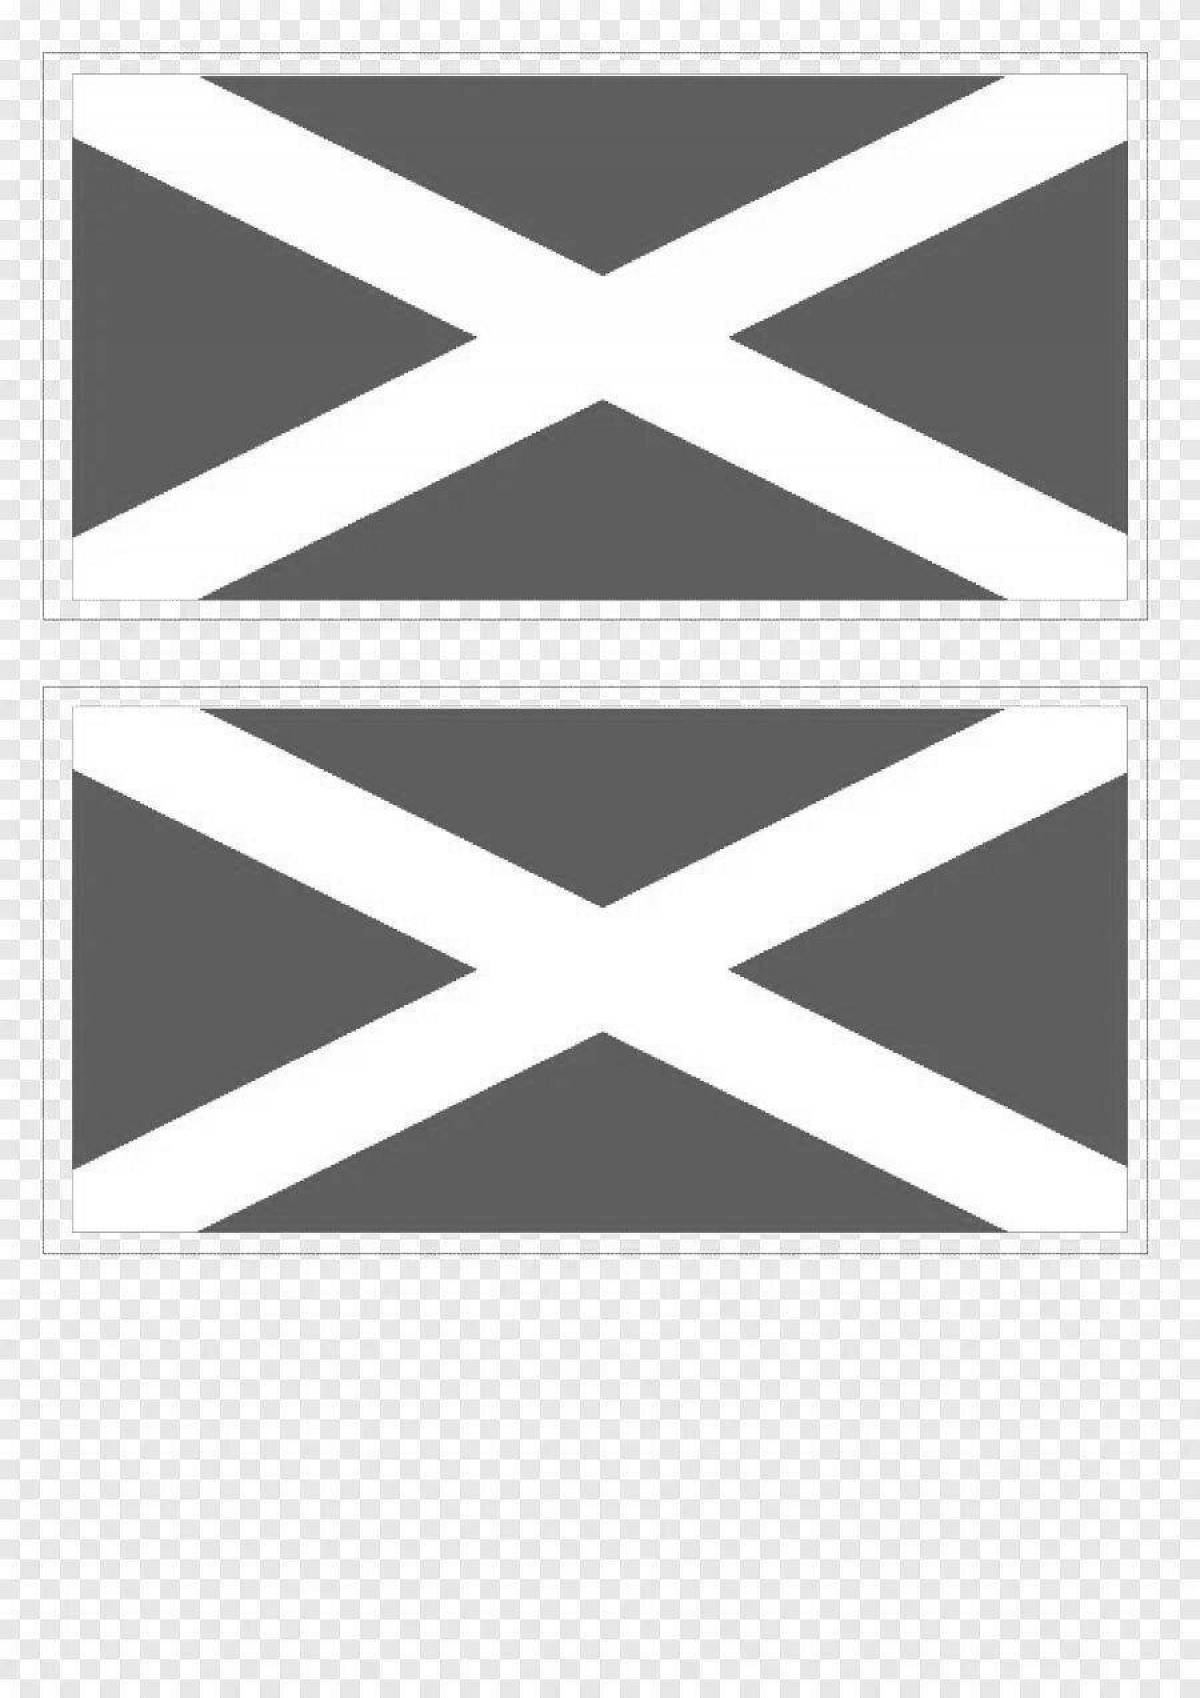 Exquisite scotland flag coloring page